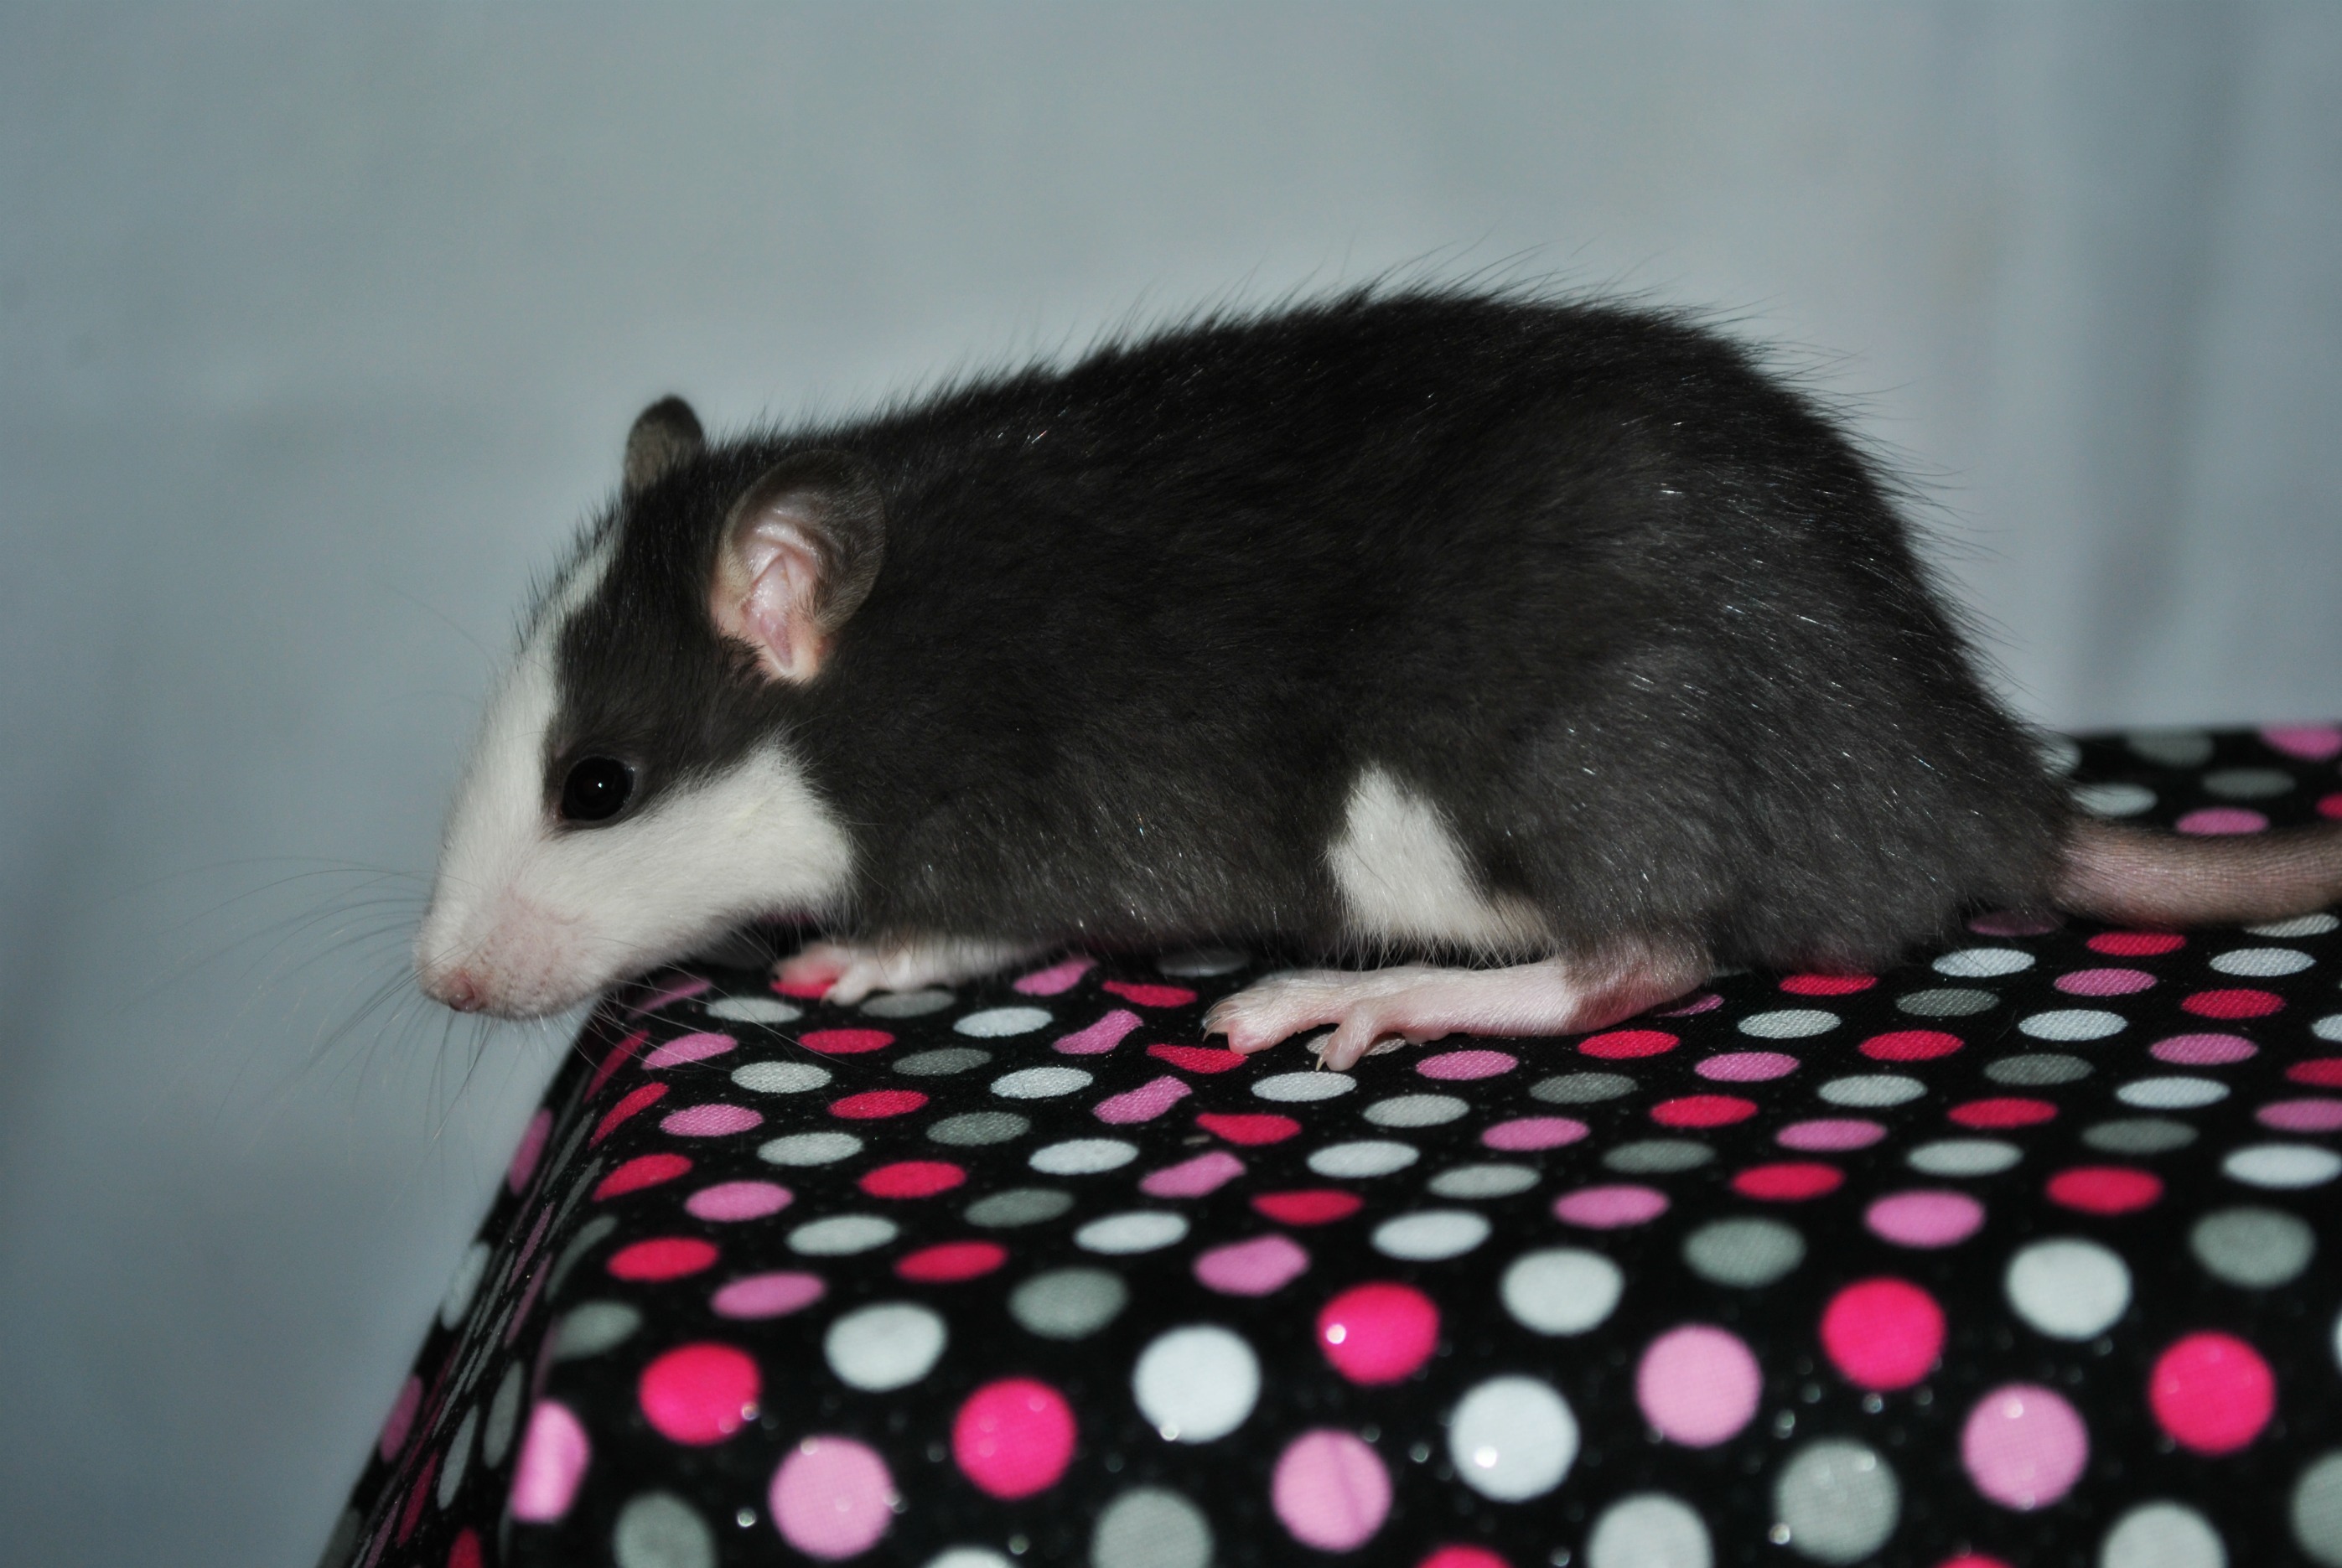 everwild rattery ny rochester